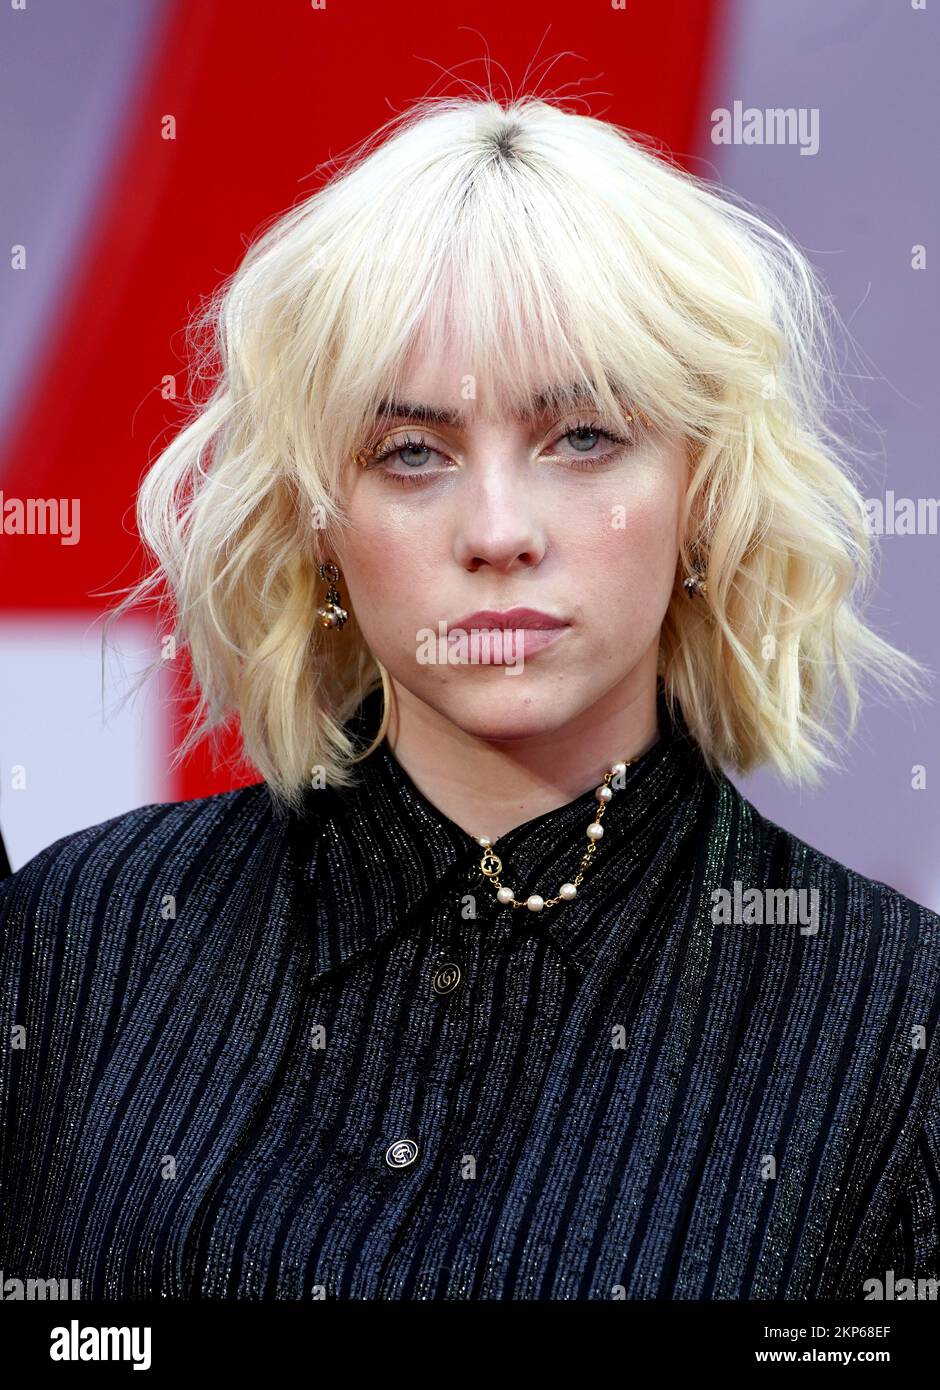 File photo dated 28/09/21 of Billie Eilish who will lead a stellar line-up for the Prince of Wales' Earthshot Prize awards ceremony being hosted by the US city of Boston. Stock Photo